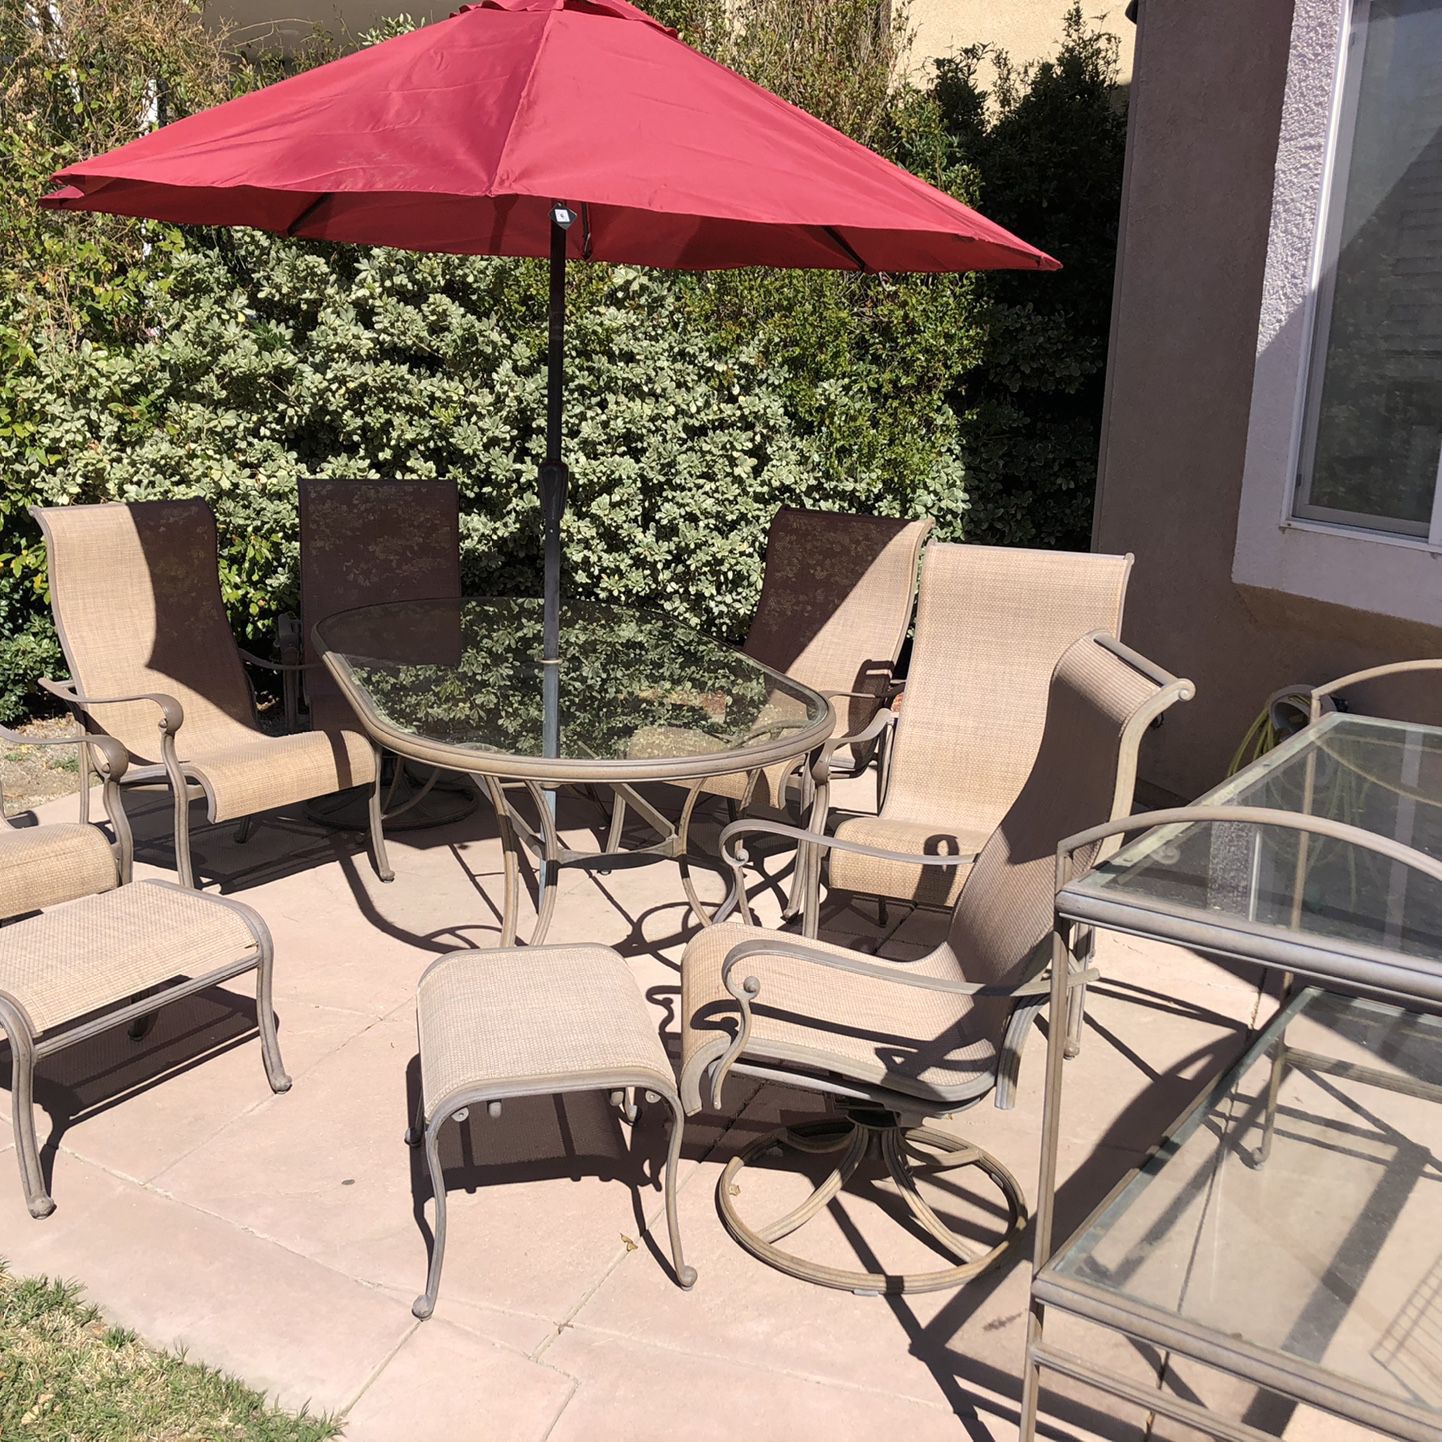 Patio Furniture Length 80” By 42”